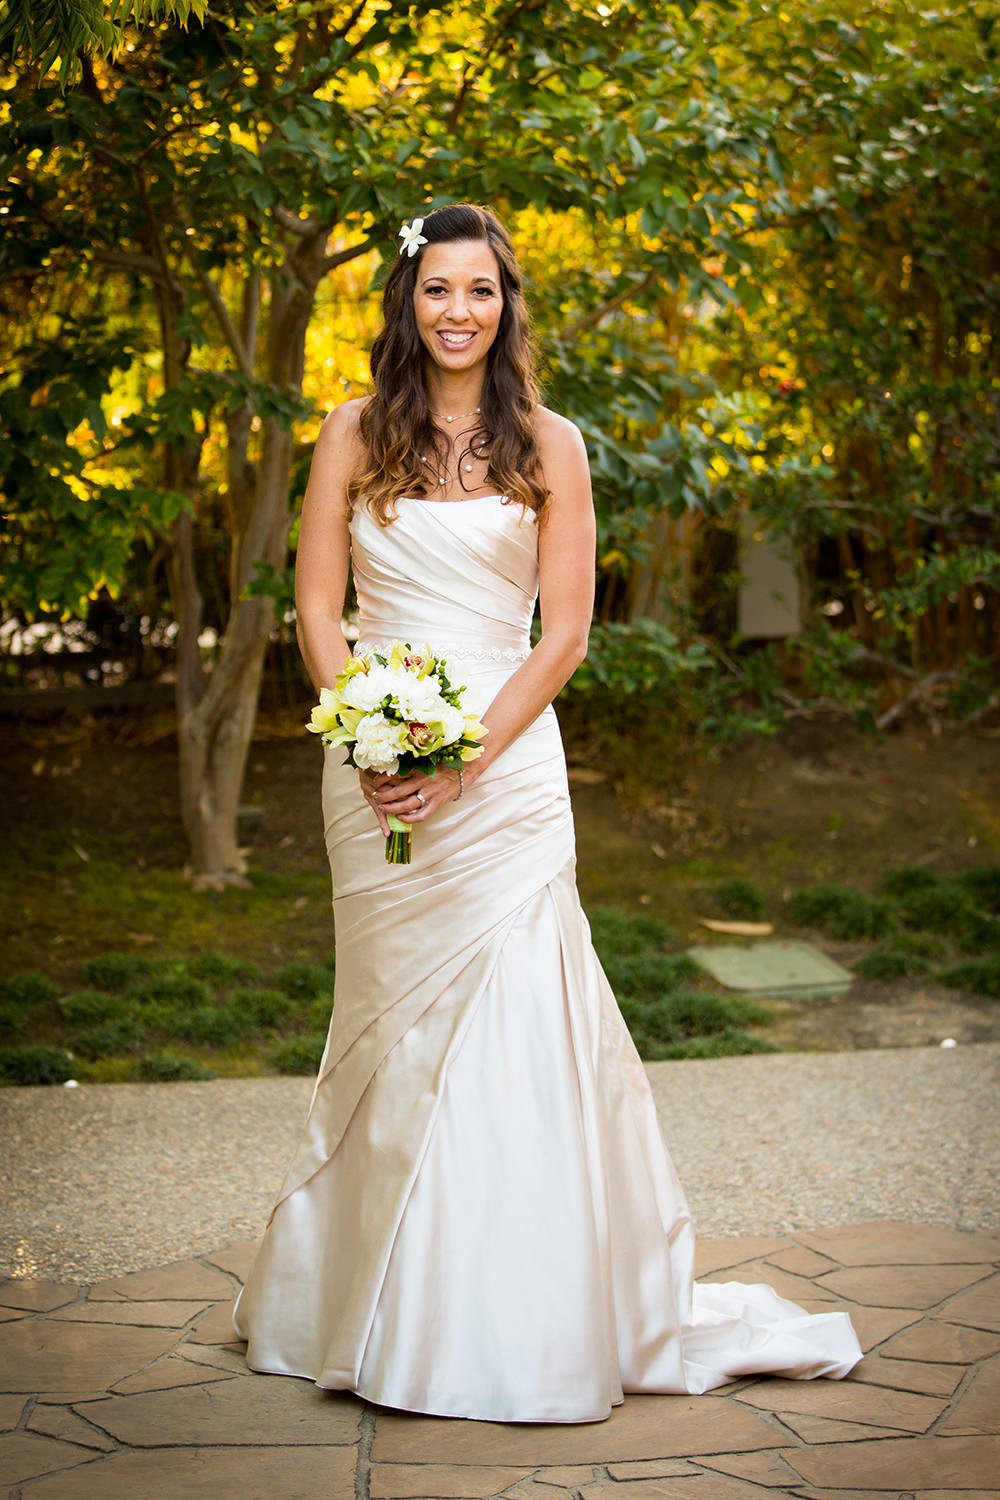 bride with white flowers smiling